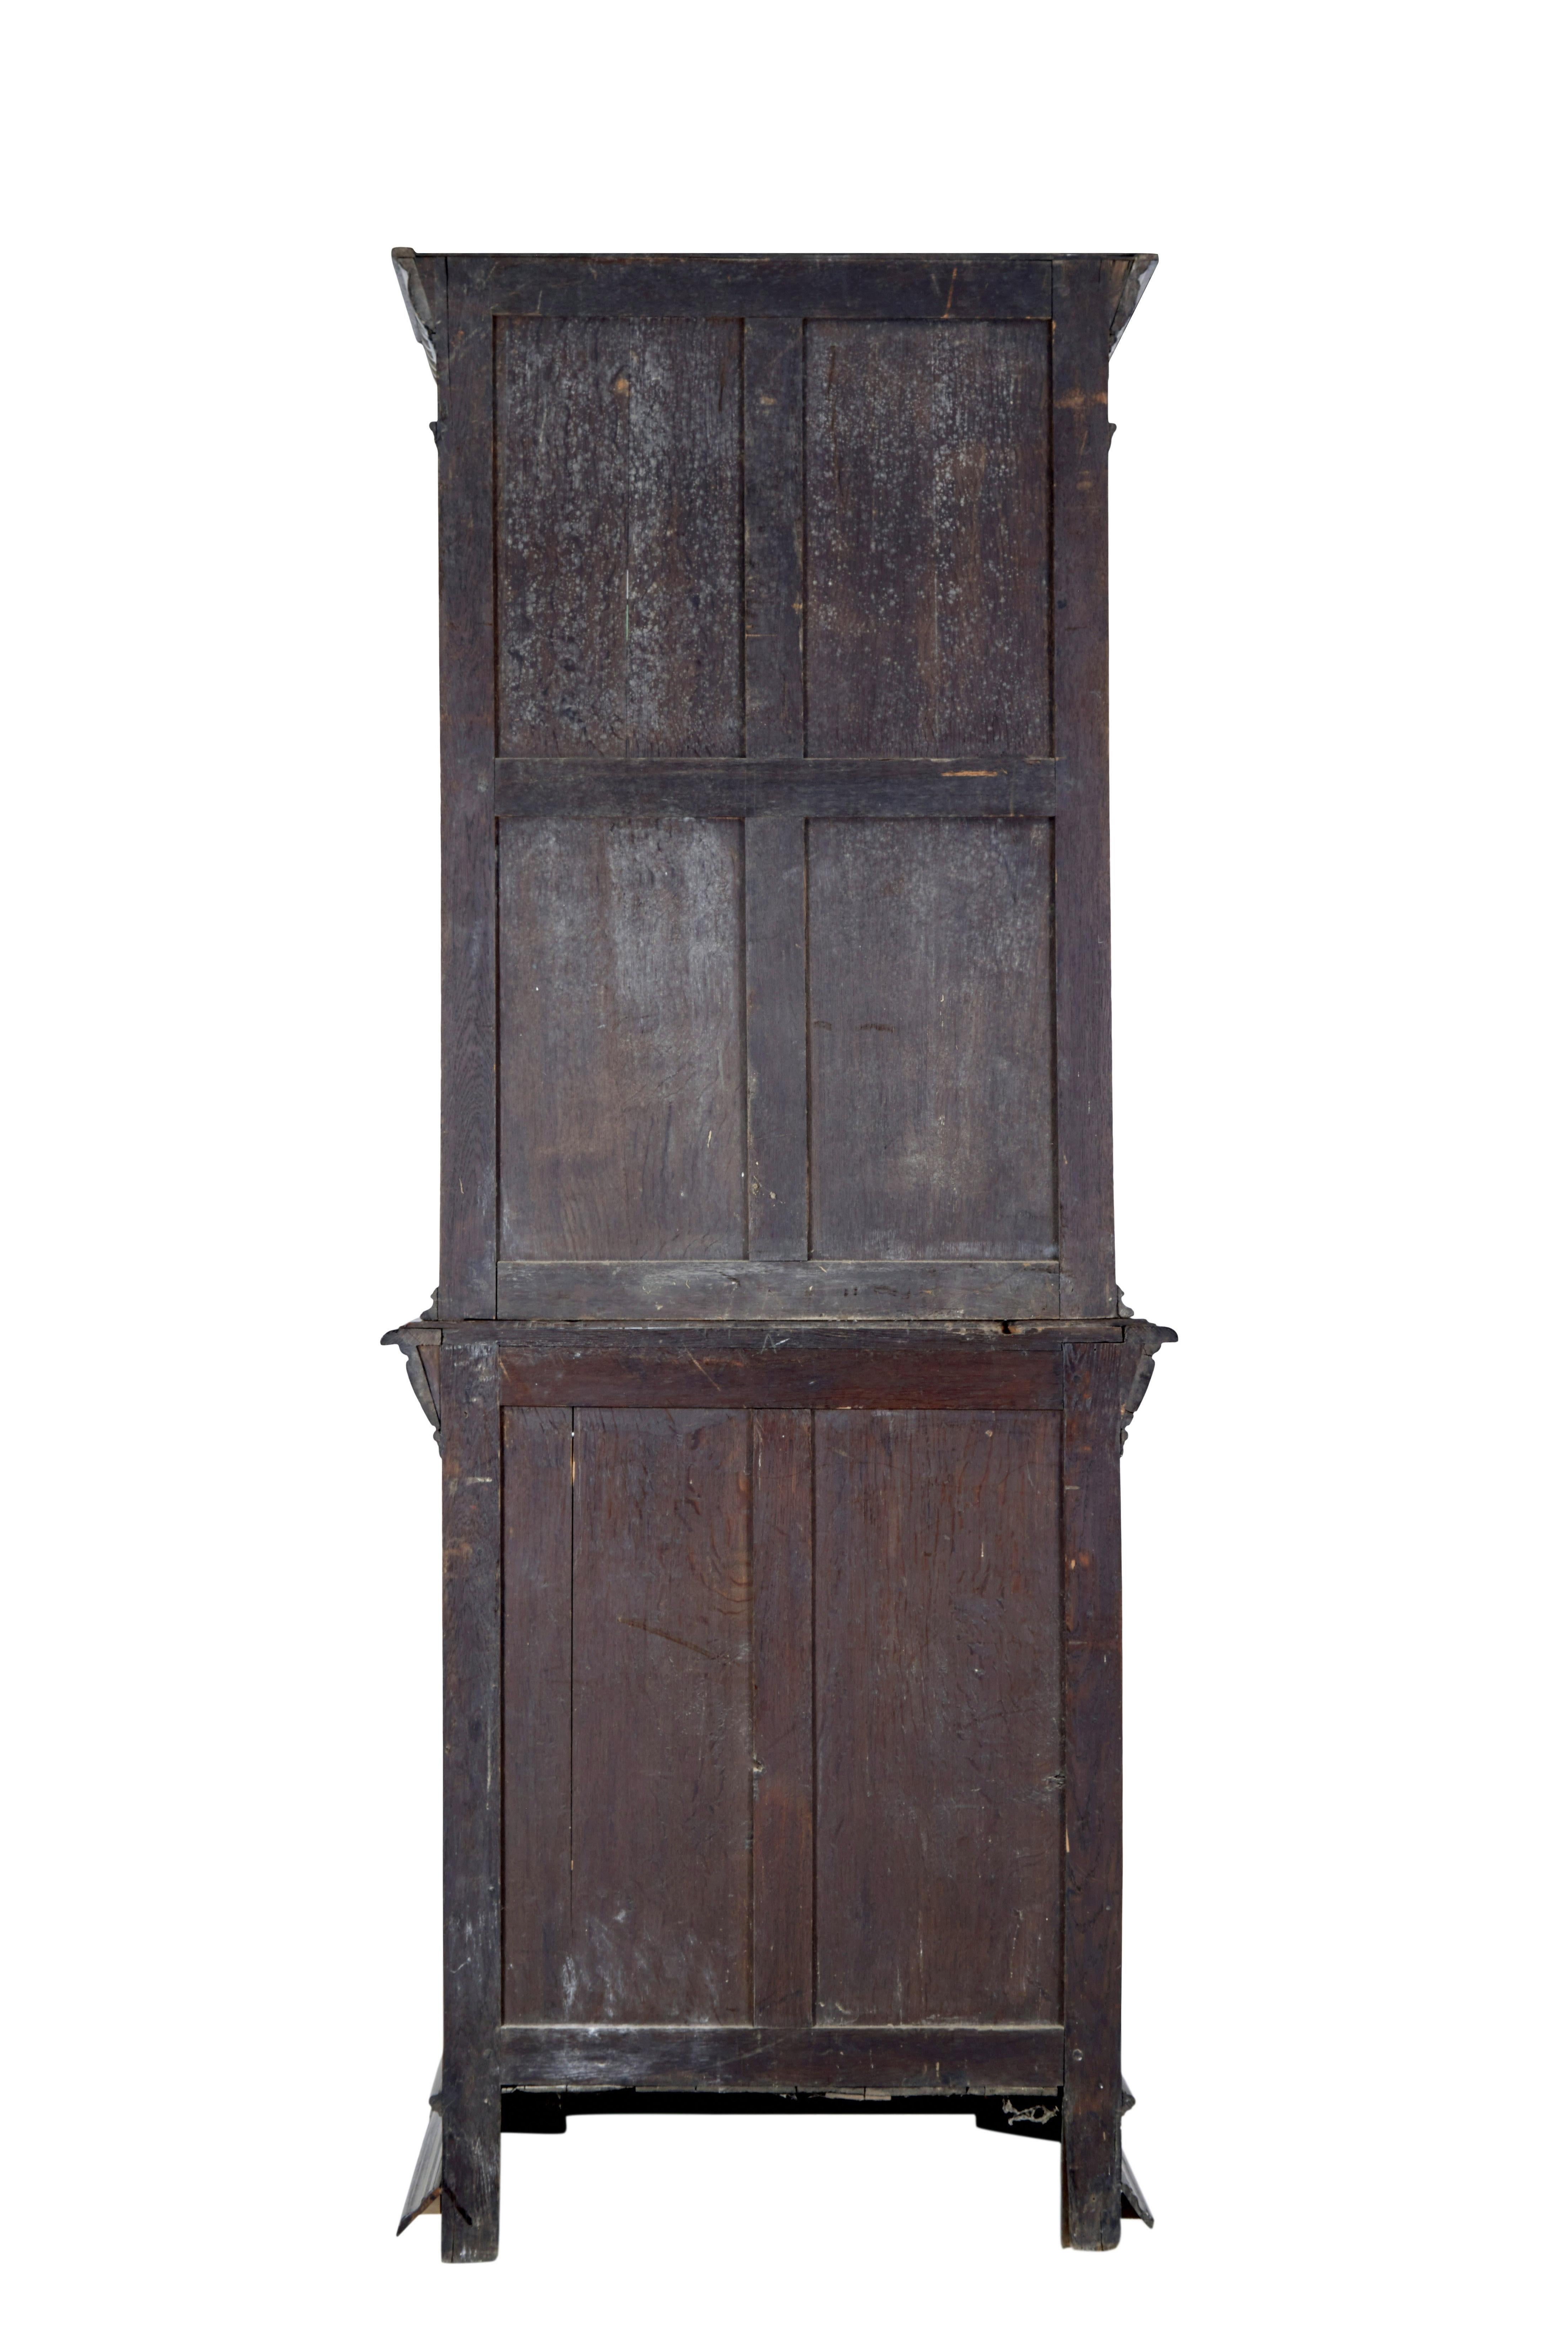 Gothic Revival 19th century Flemish oak and stain glass cabinet For Sale